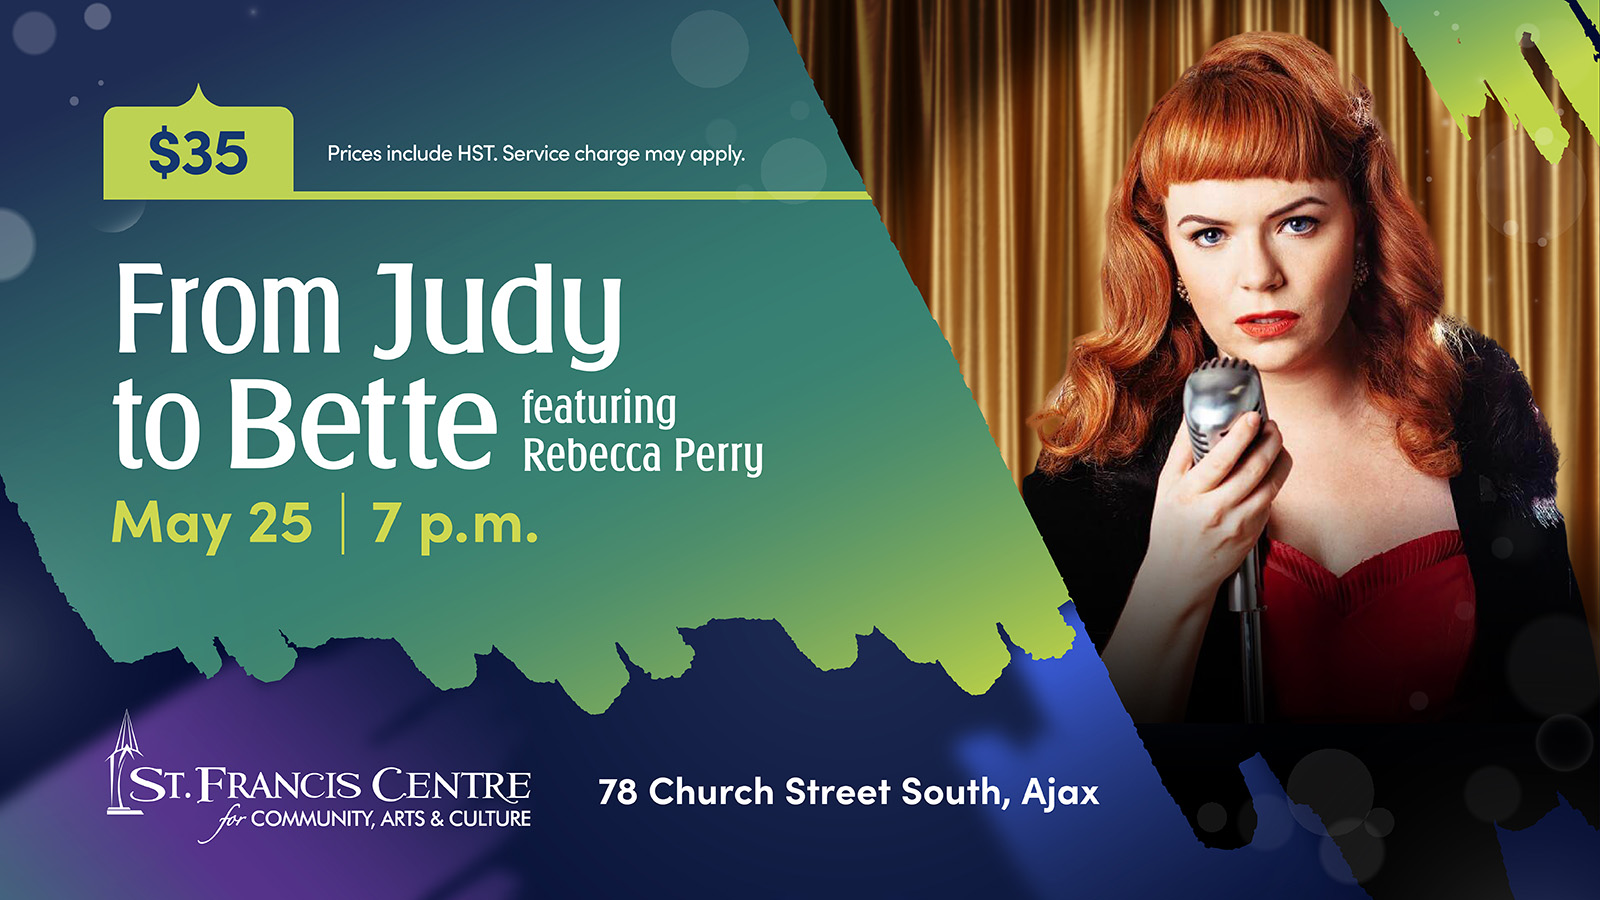 Advertisement for From Judy to Bette starring Rebecca Perry